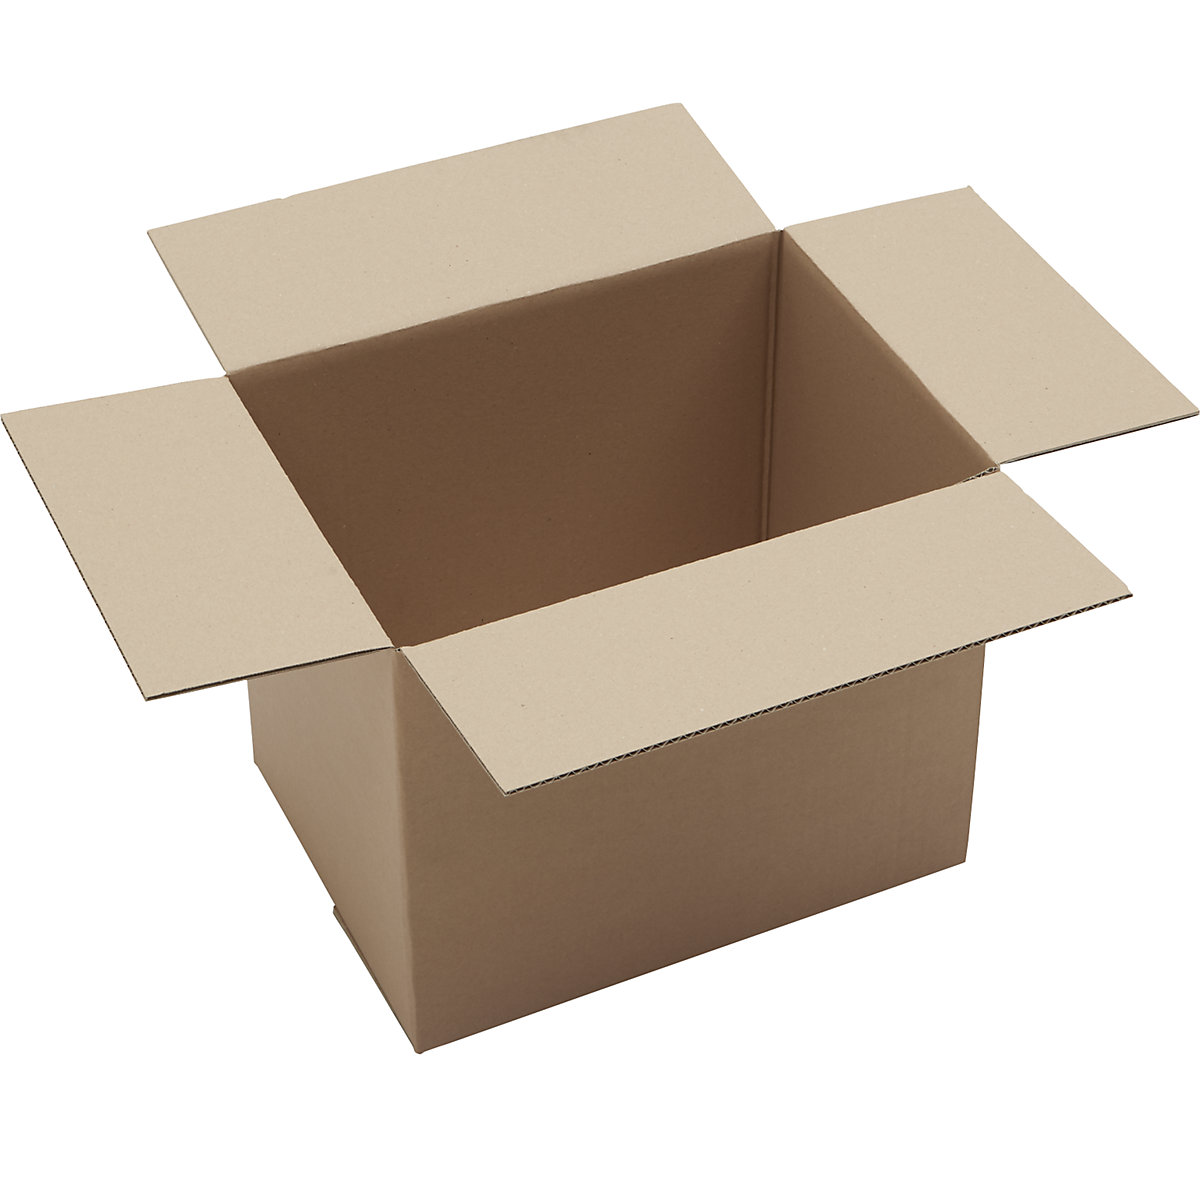 Corrugated cardboard folding boxes, FEFCO 0201, single fluted, pack of 50, internal dimensions 375 x 275 x 300 mm-4